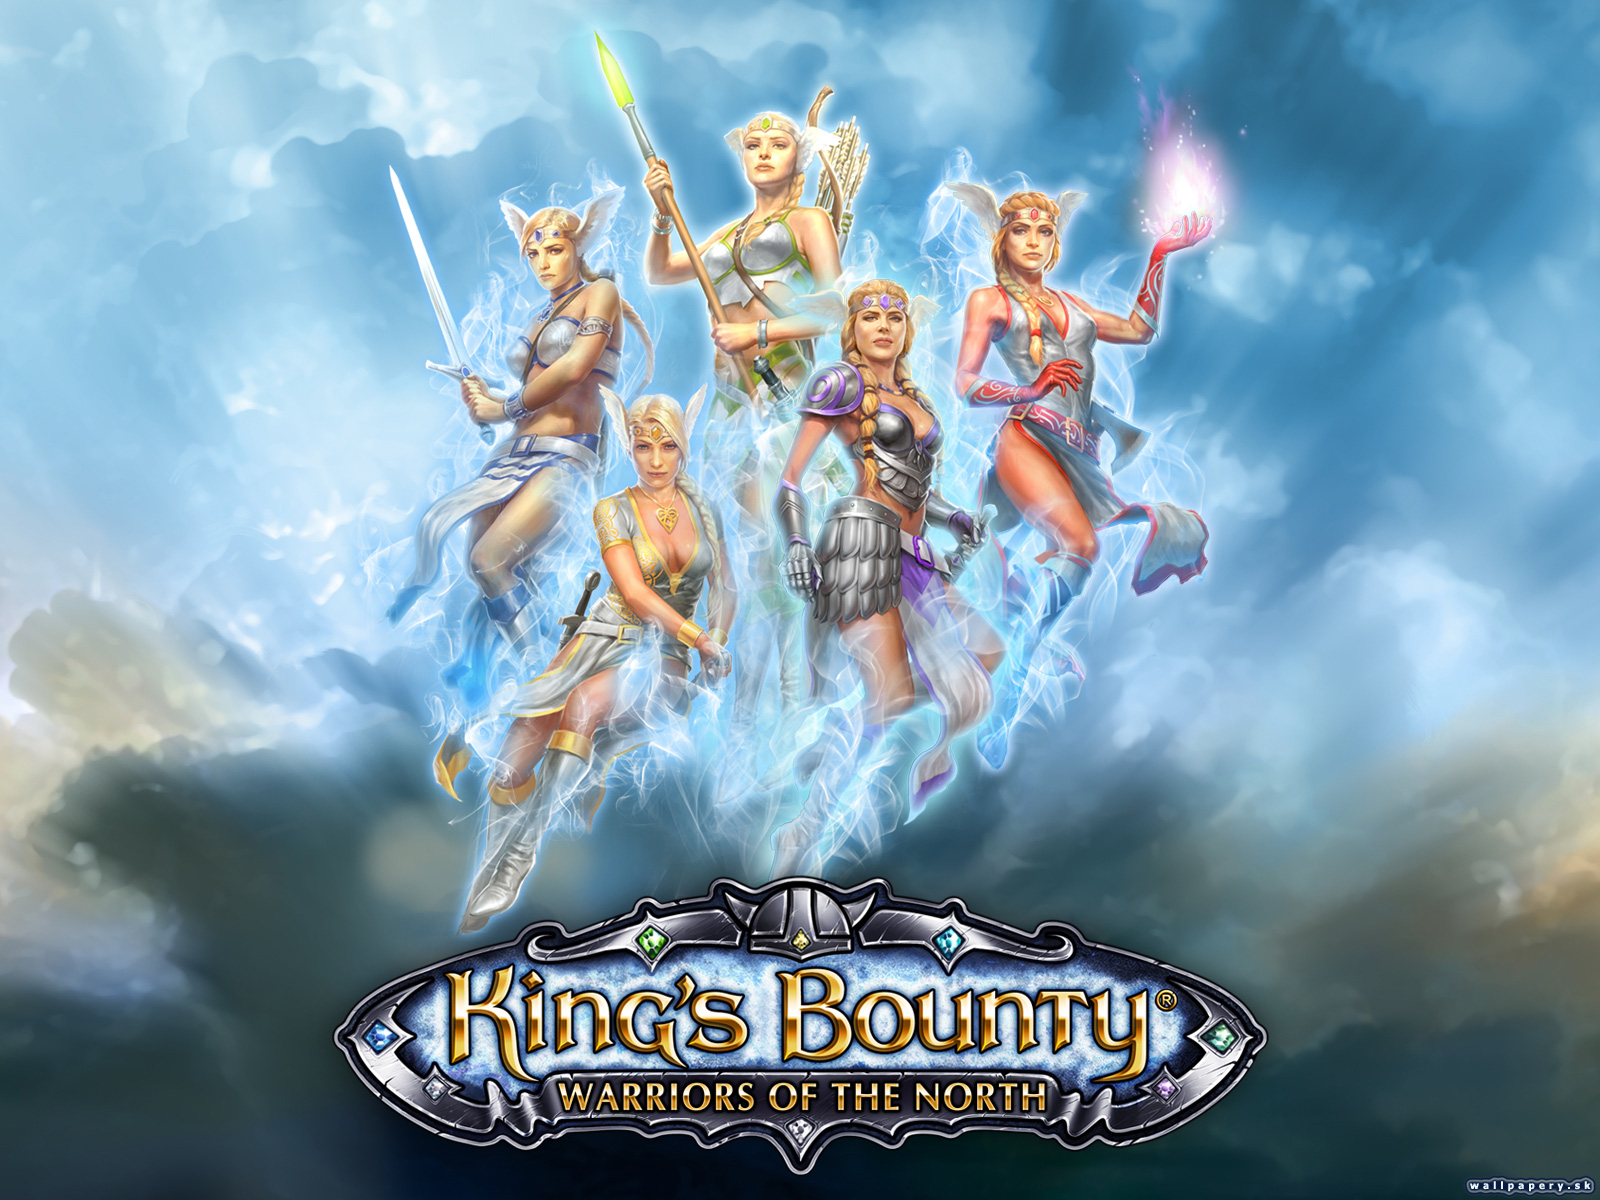 King's Bounty: Warriors of the North - wallpaper 4